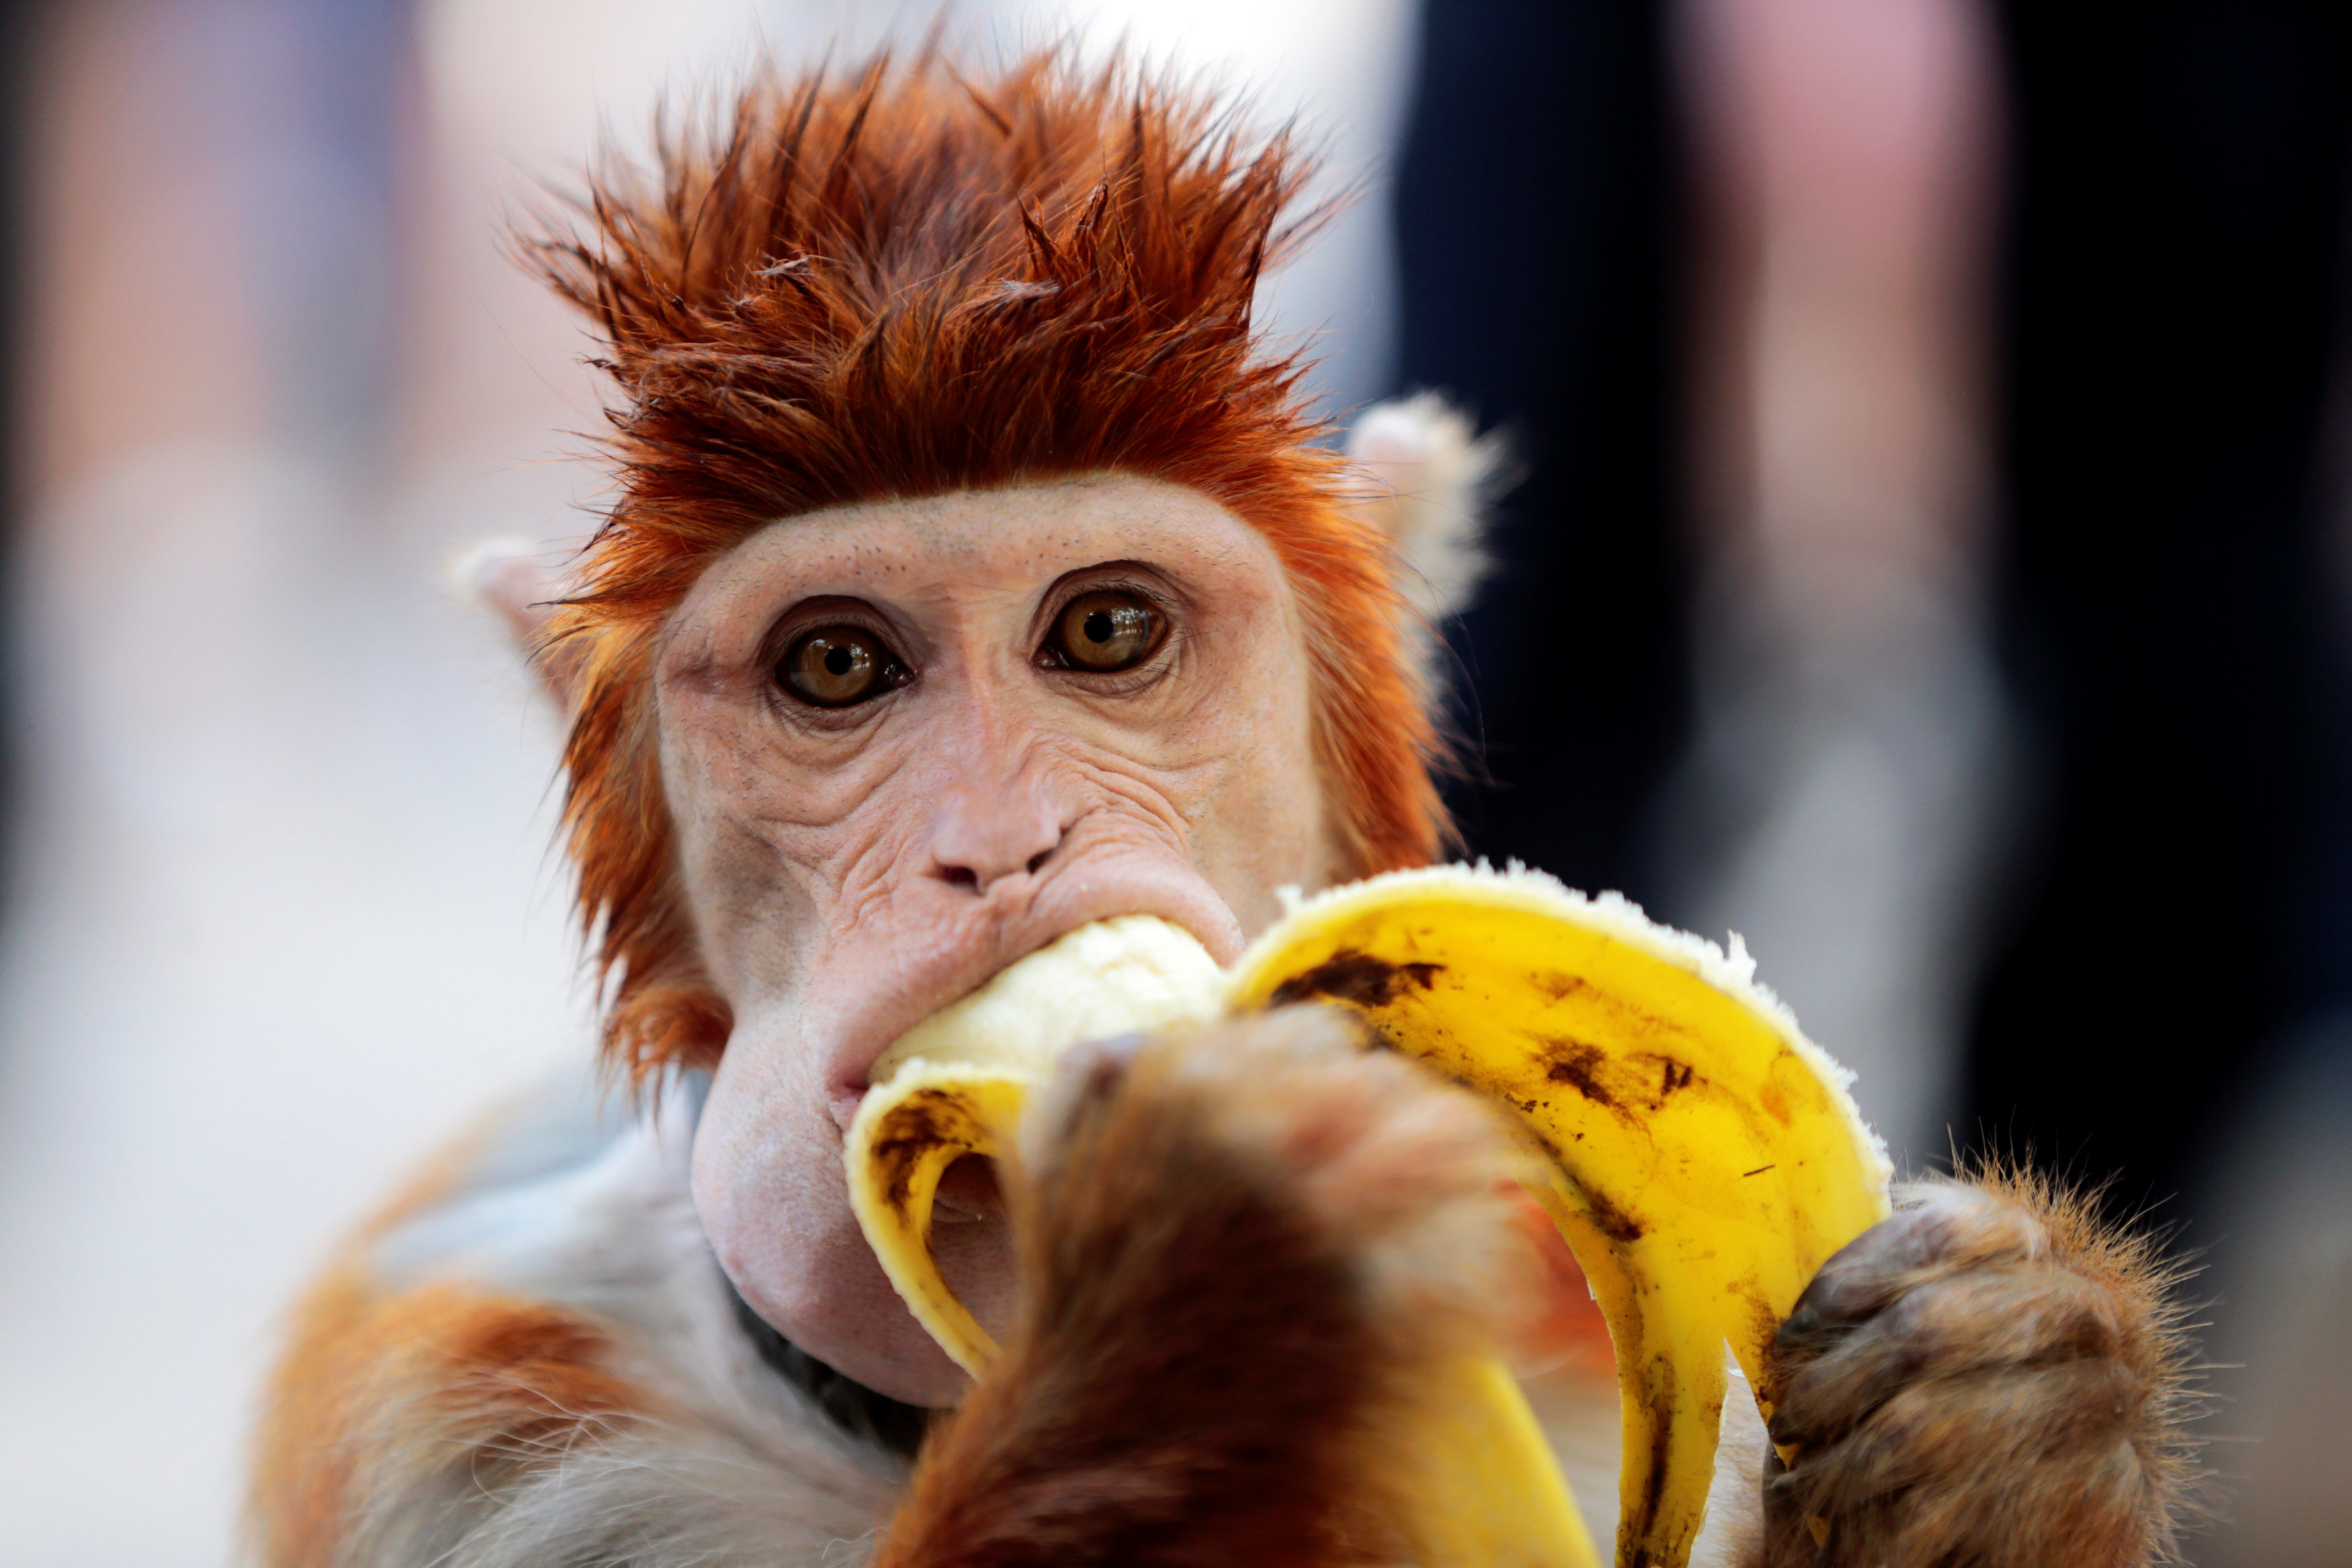 A monkey eats a banana as it takes a break from performing at a cultural center in Islamabad, Pakistan October 22, 2016. REUTERS/Caren Firouz TPX IMAGES OF THE DAYn